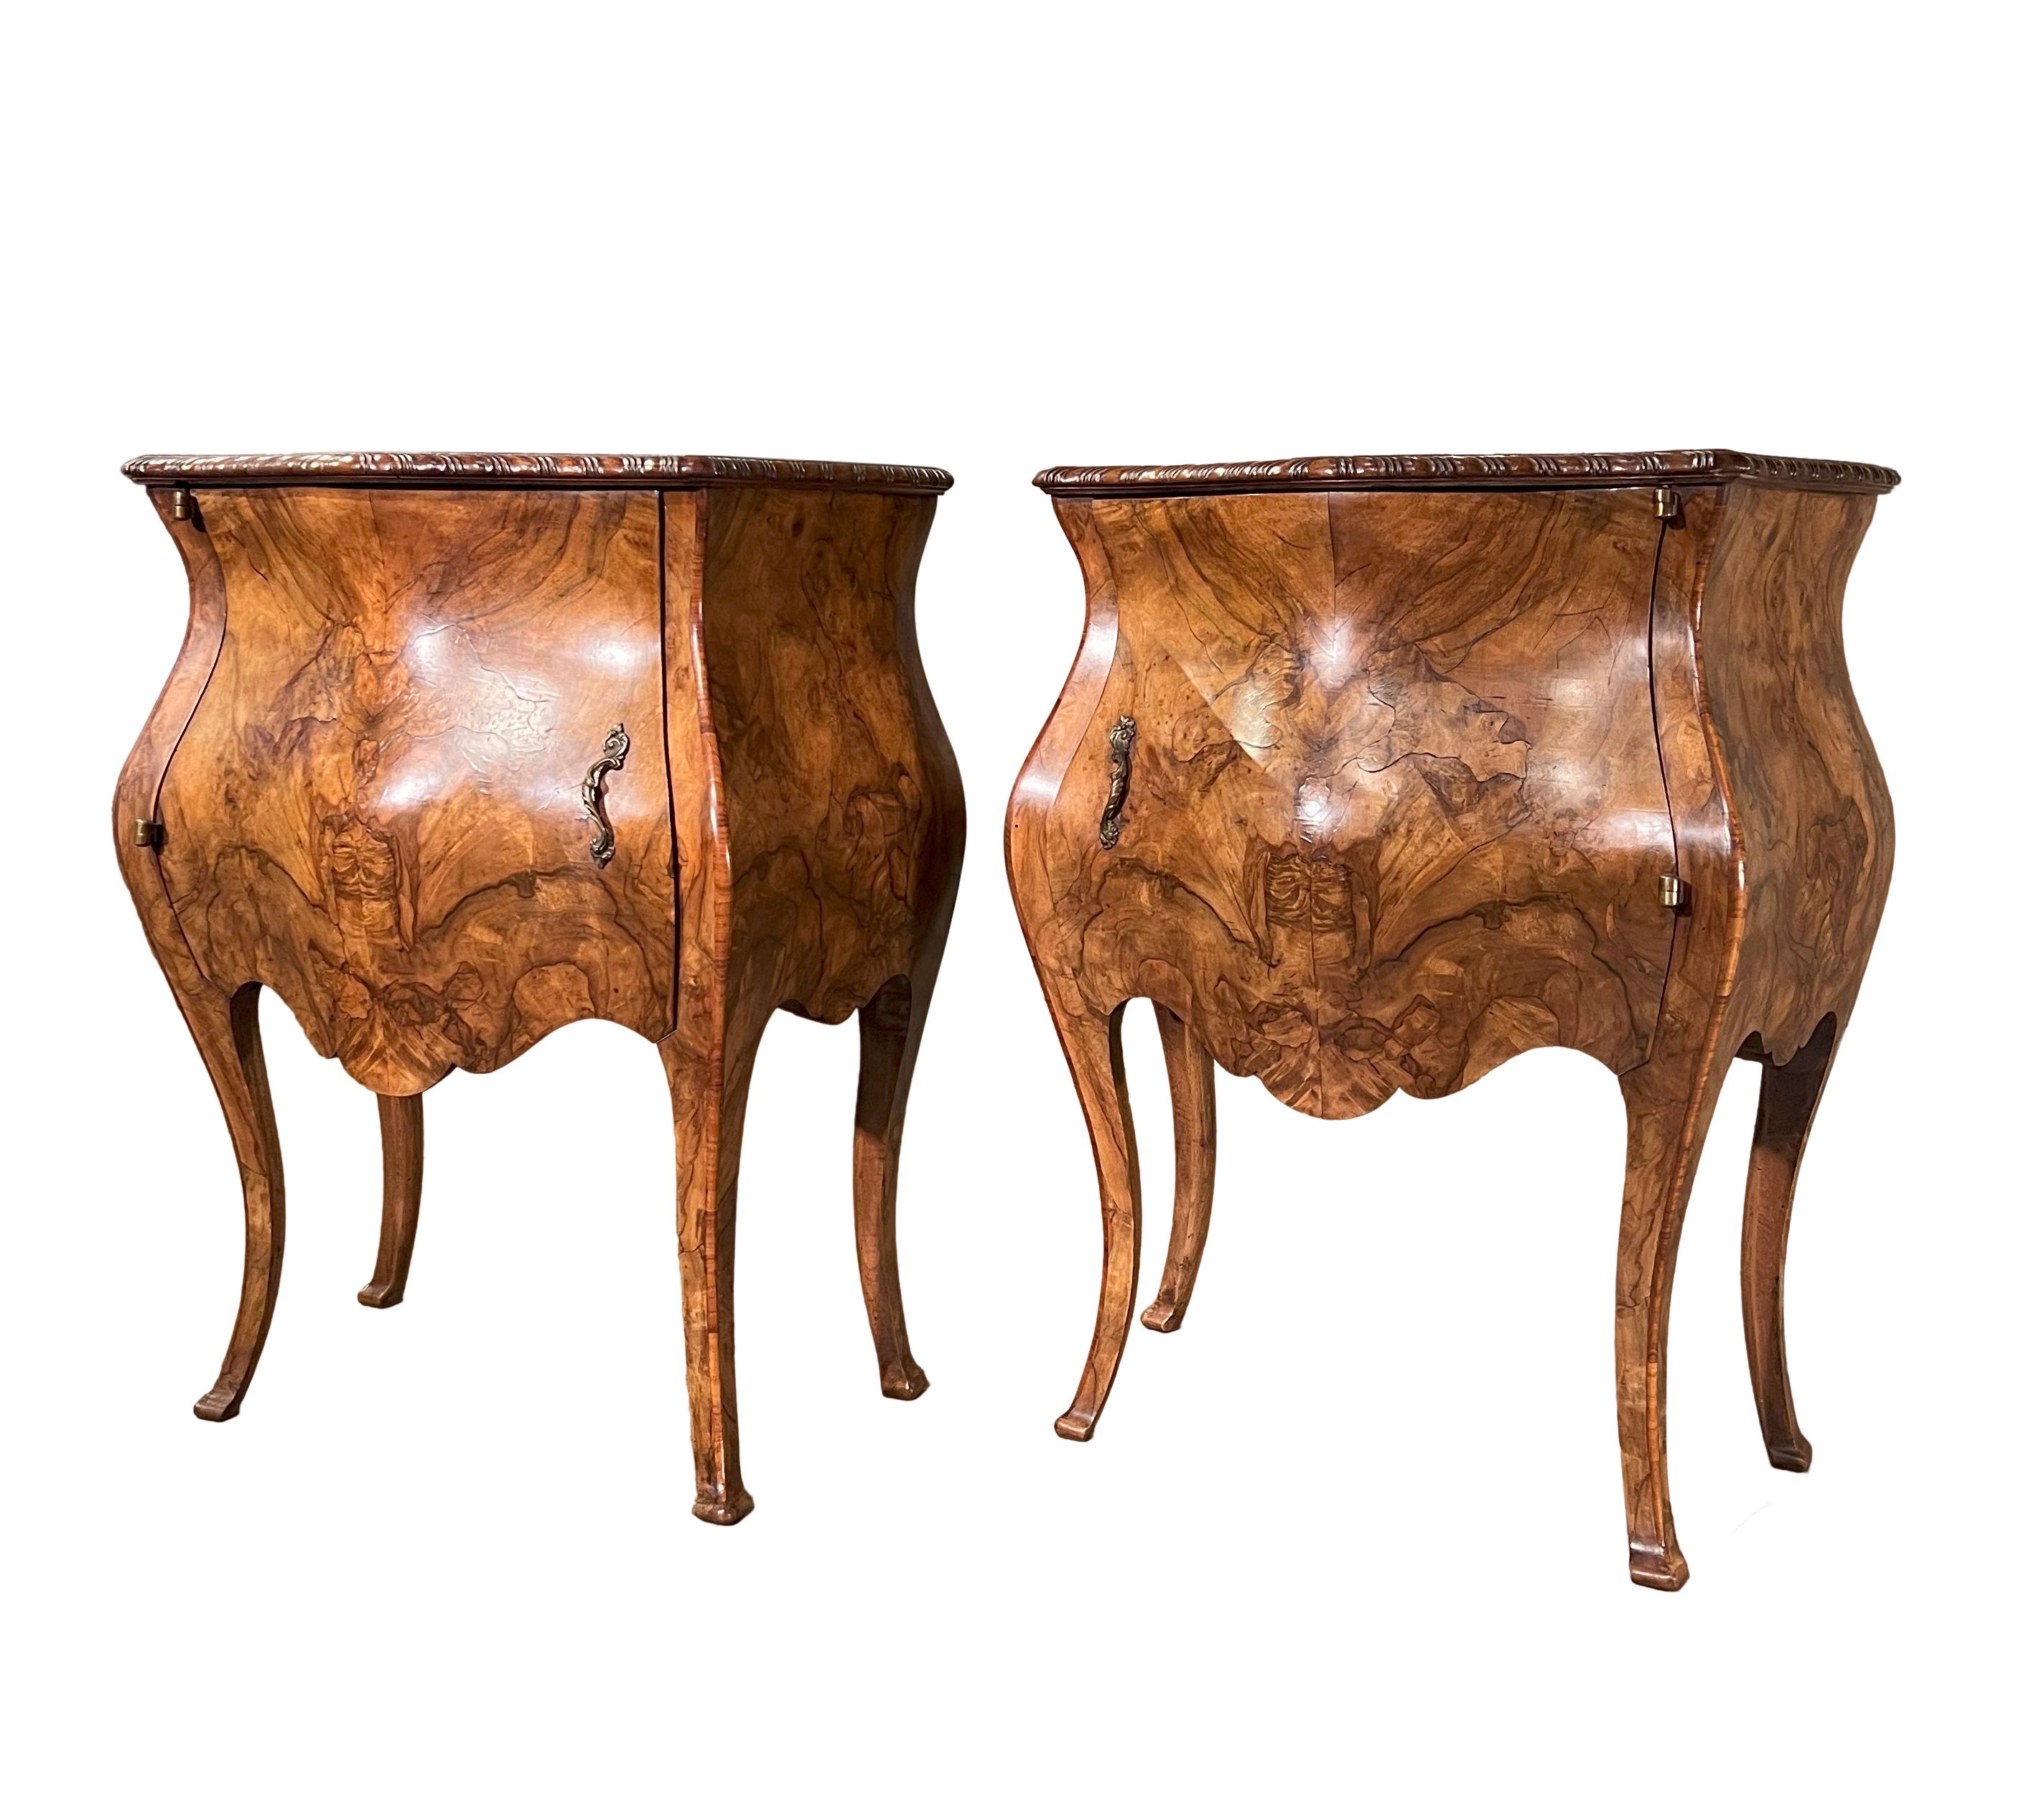 These Italian Antique Bombe Louis XV Style Venetian Pair of Night Stands are wonderfully crafted pieces that will add a wonderful visual appeal to any space they are added to. The pieces are crafted from aged walnut veneer and are beautifully